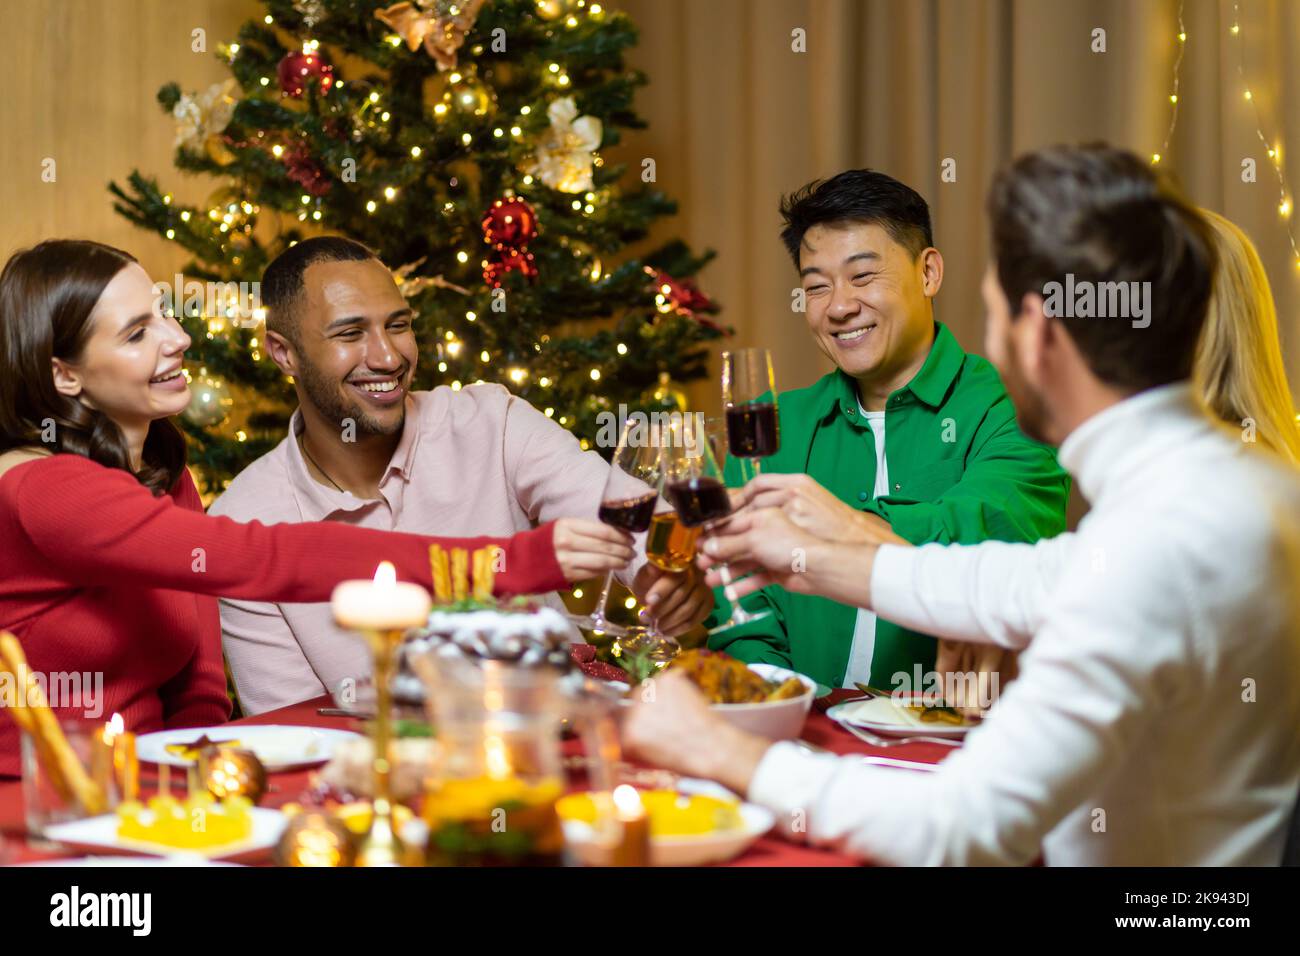 Festive Christmas dinner, diverse friends celebrating new year at home, eating and drinking wine, smiling and wishing each other happy holidays. Stock Photo